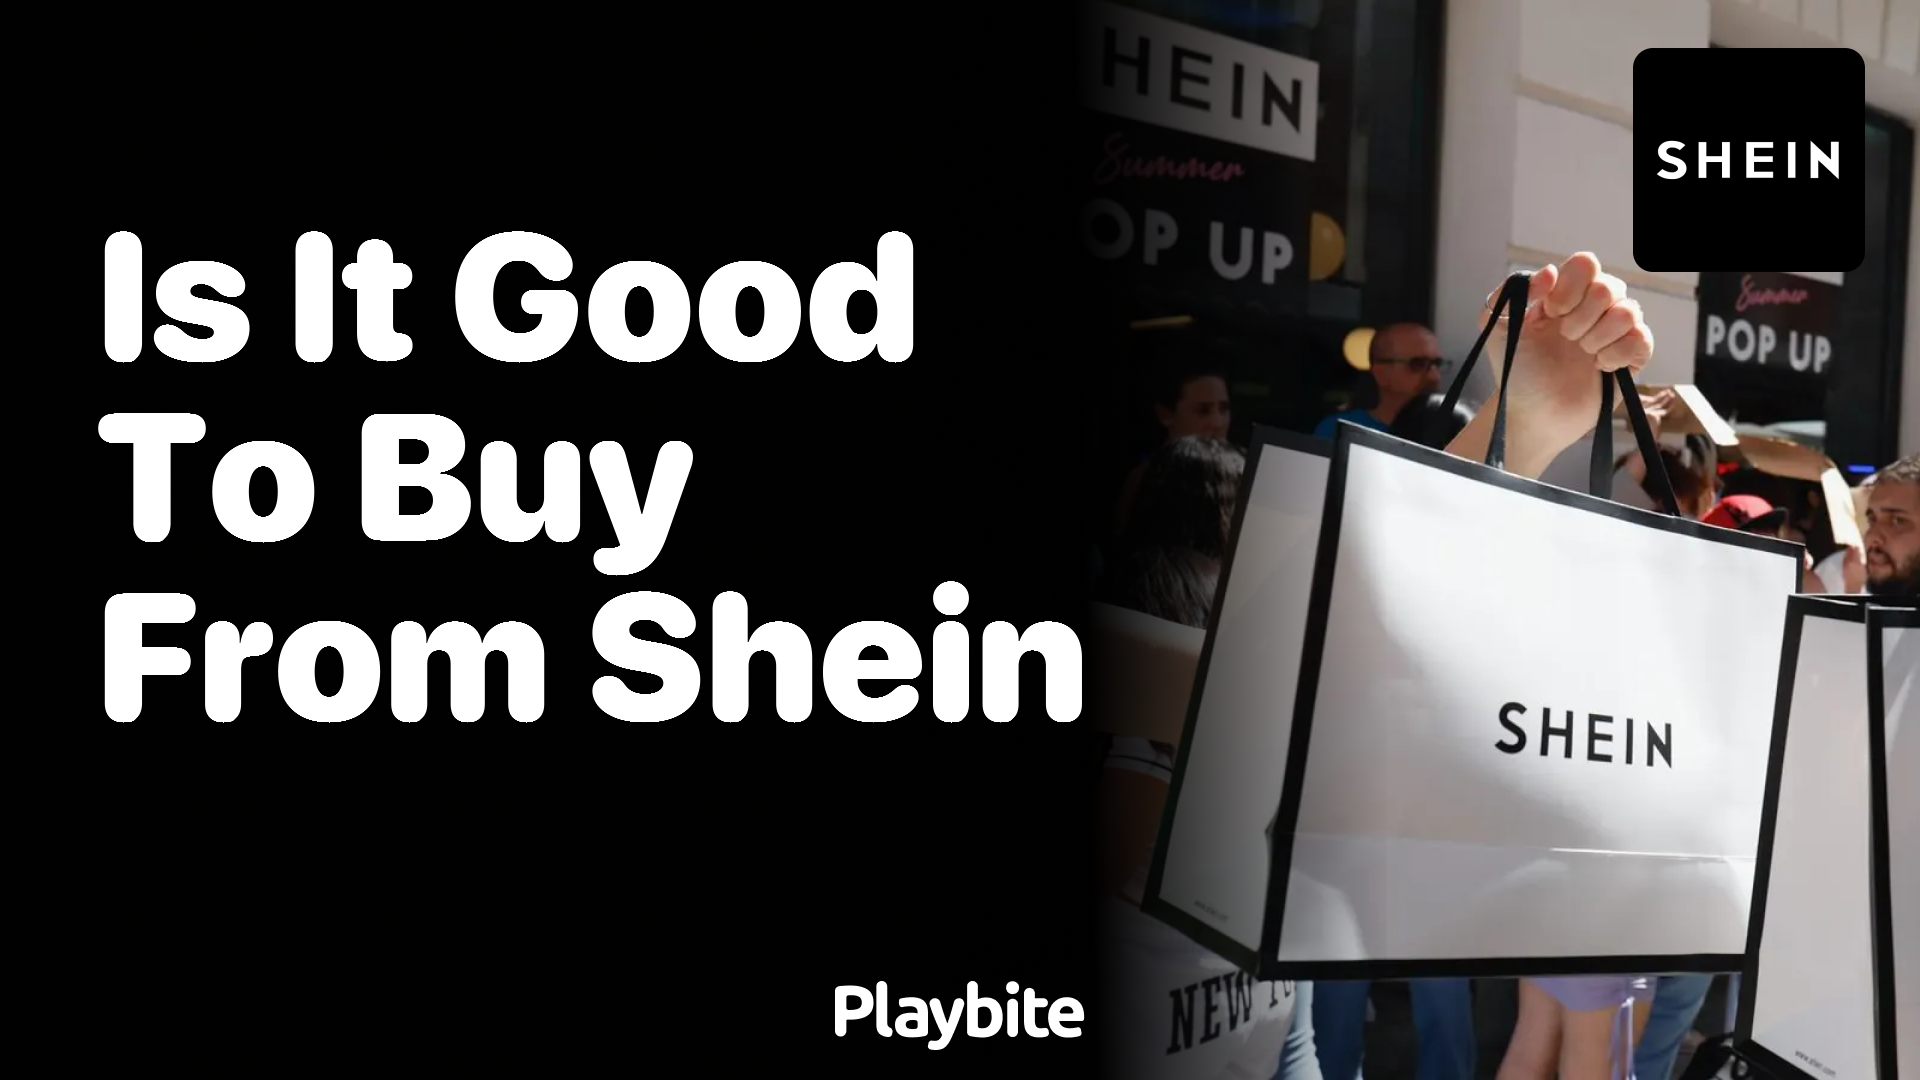 Is It a Good Idea to Shop from SHEIN? - Playbite